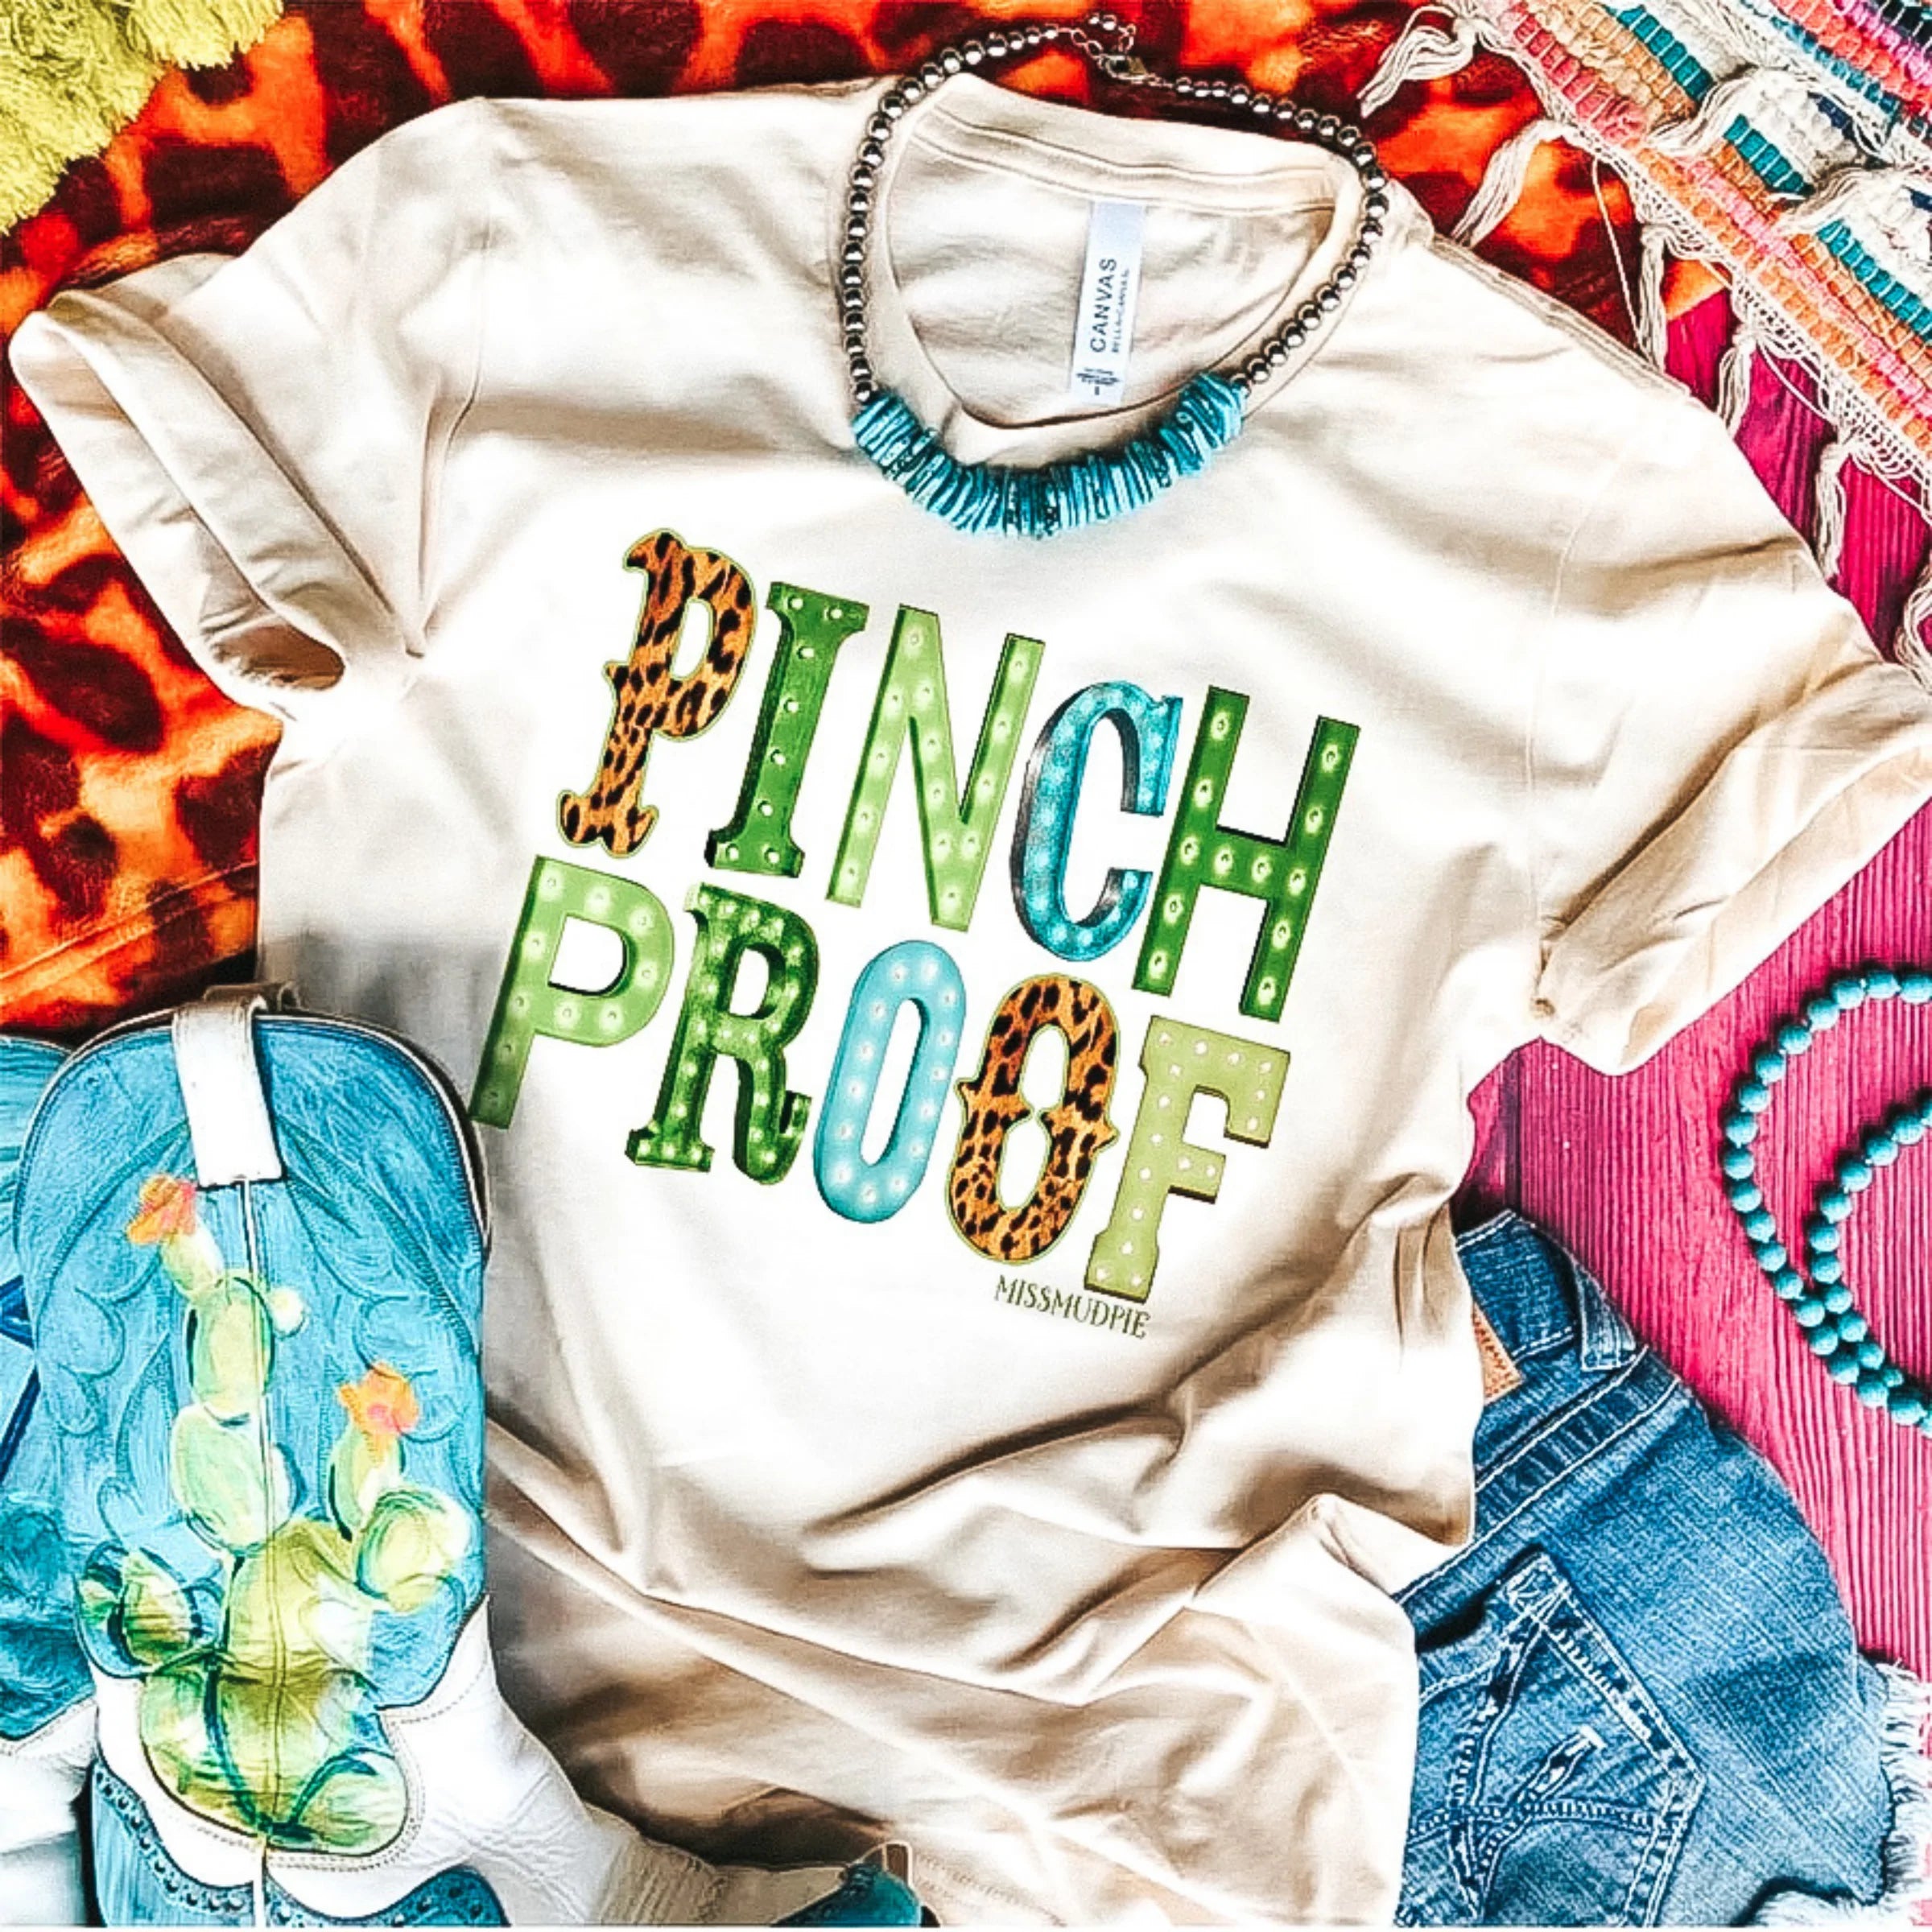 A cream colored tee shirt with a multi print graphic that says "Pinch Proof." Pictured on pink background with cowgirl boots and turquoise jewelry.